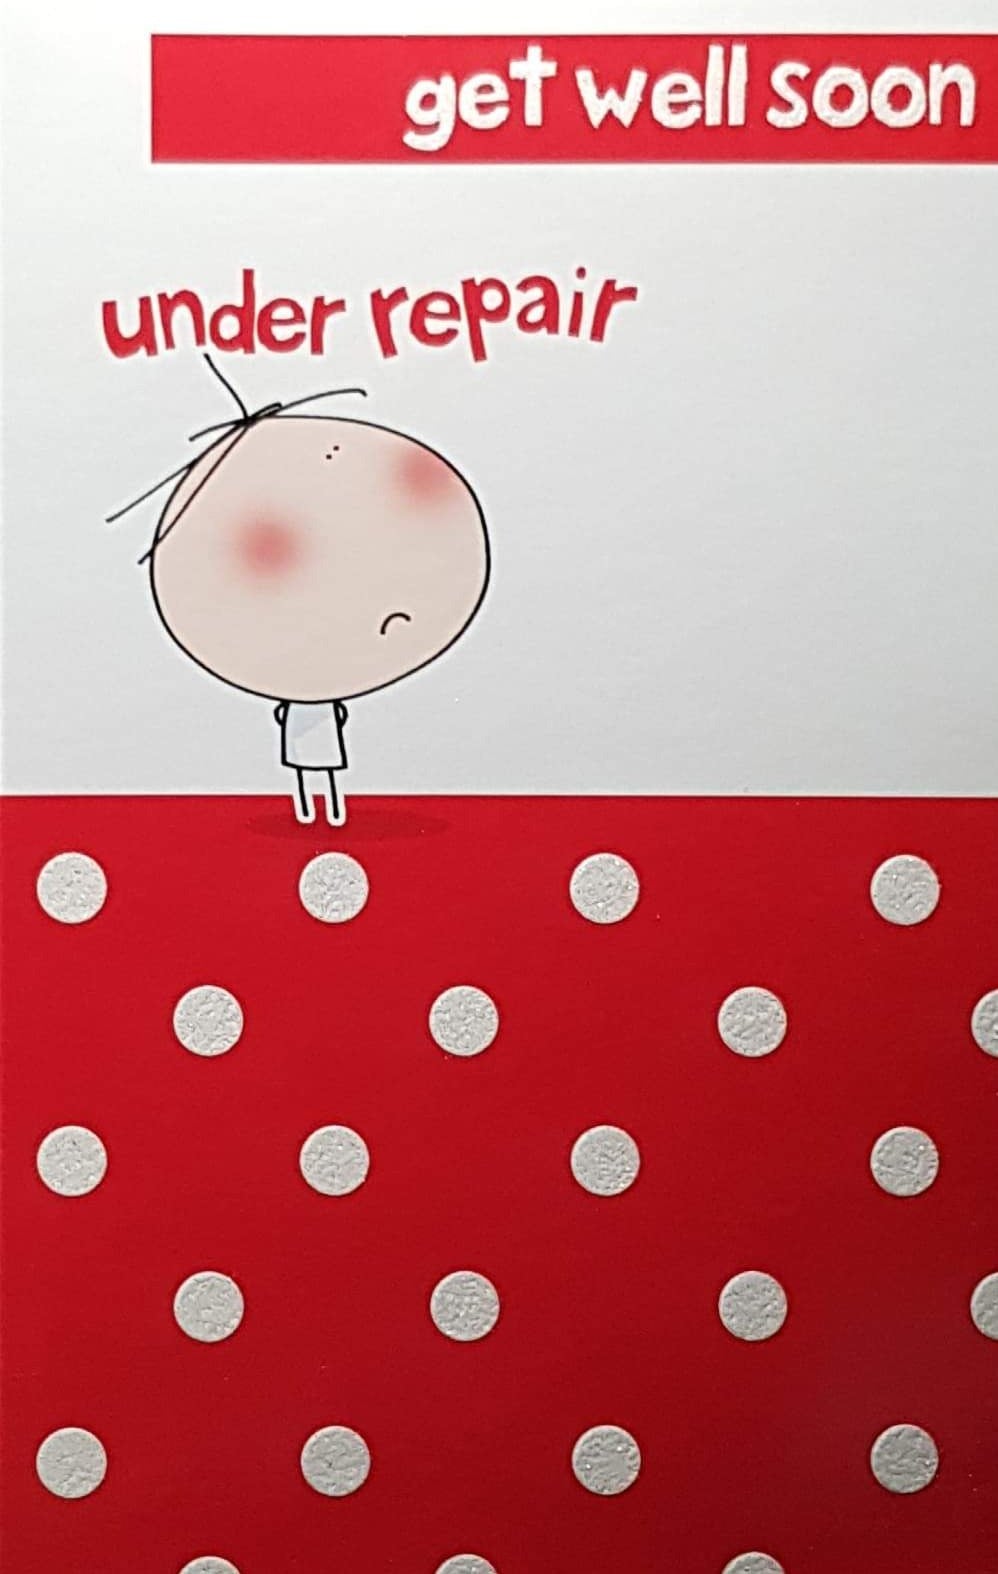 Get Well Card - 'Under Repair' & White Spots On A Red Carpet